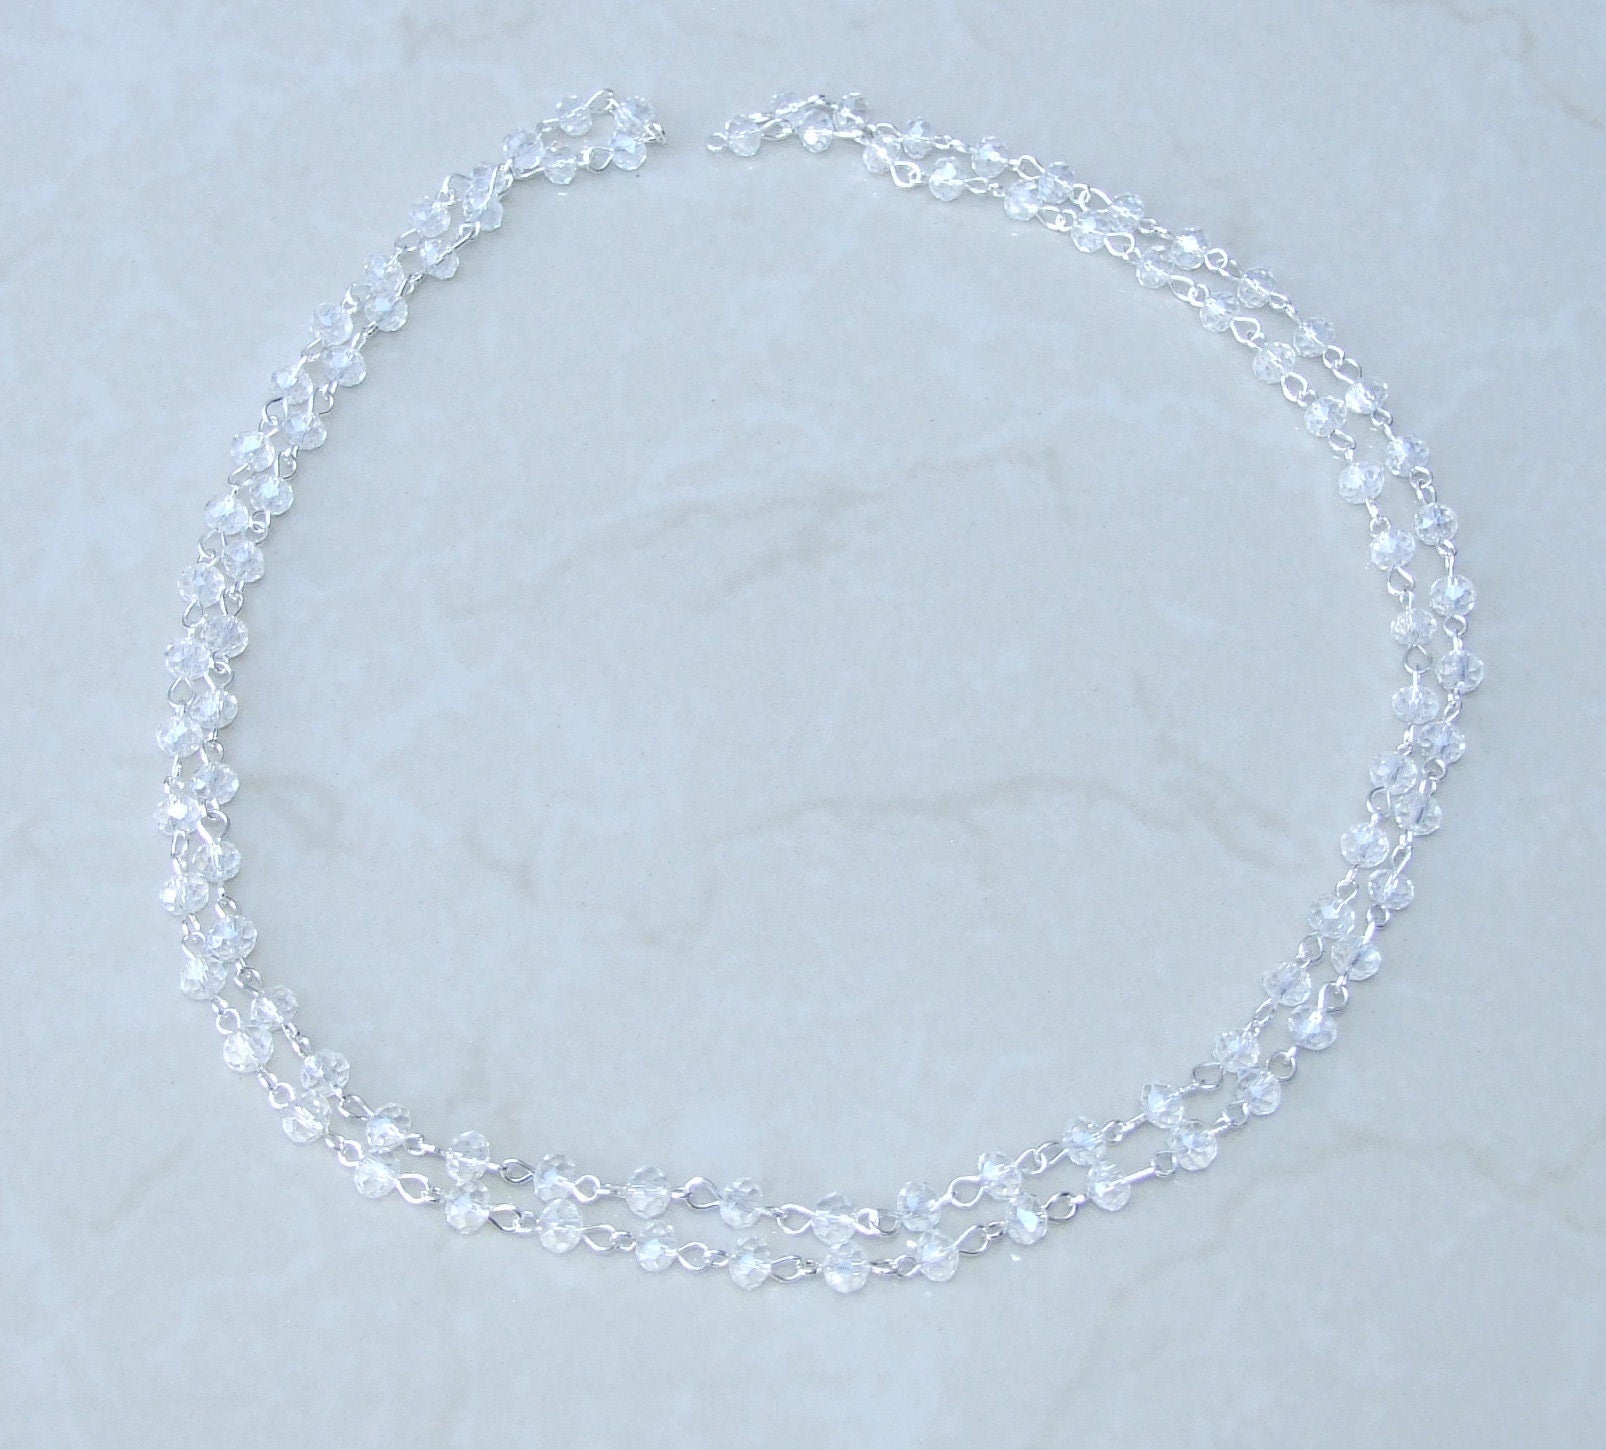 Clear Faceted Glass Bead Rosary Chain, 1 Meter, Beaded Chain, Body Chain Jewelry, Silver Chain, Necklace Chain, Belly Chain, 6mm x 8mm, 001